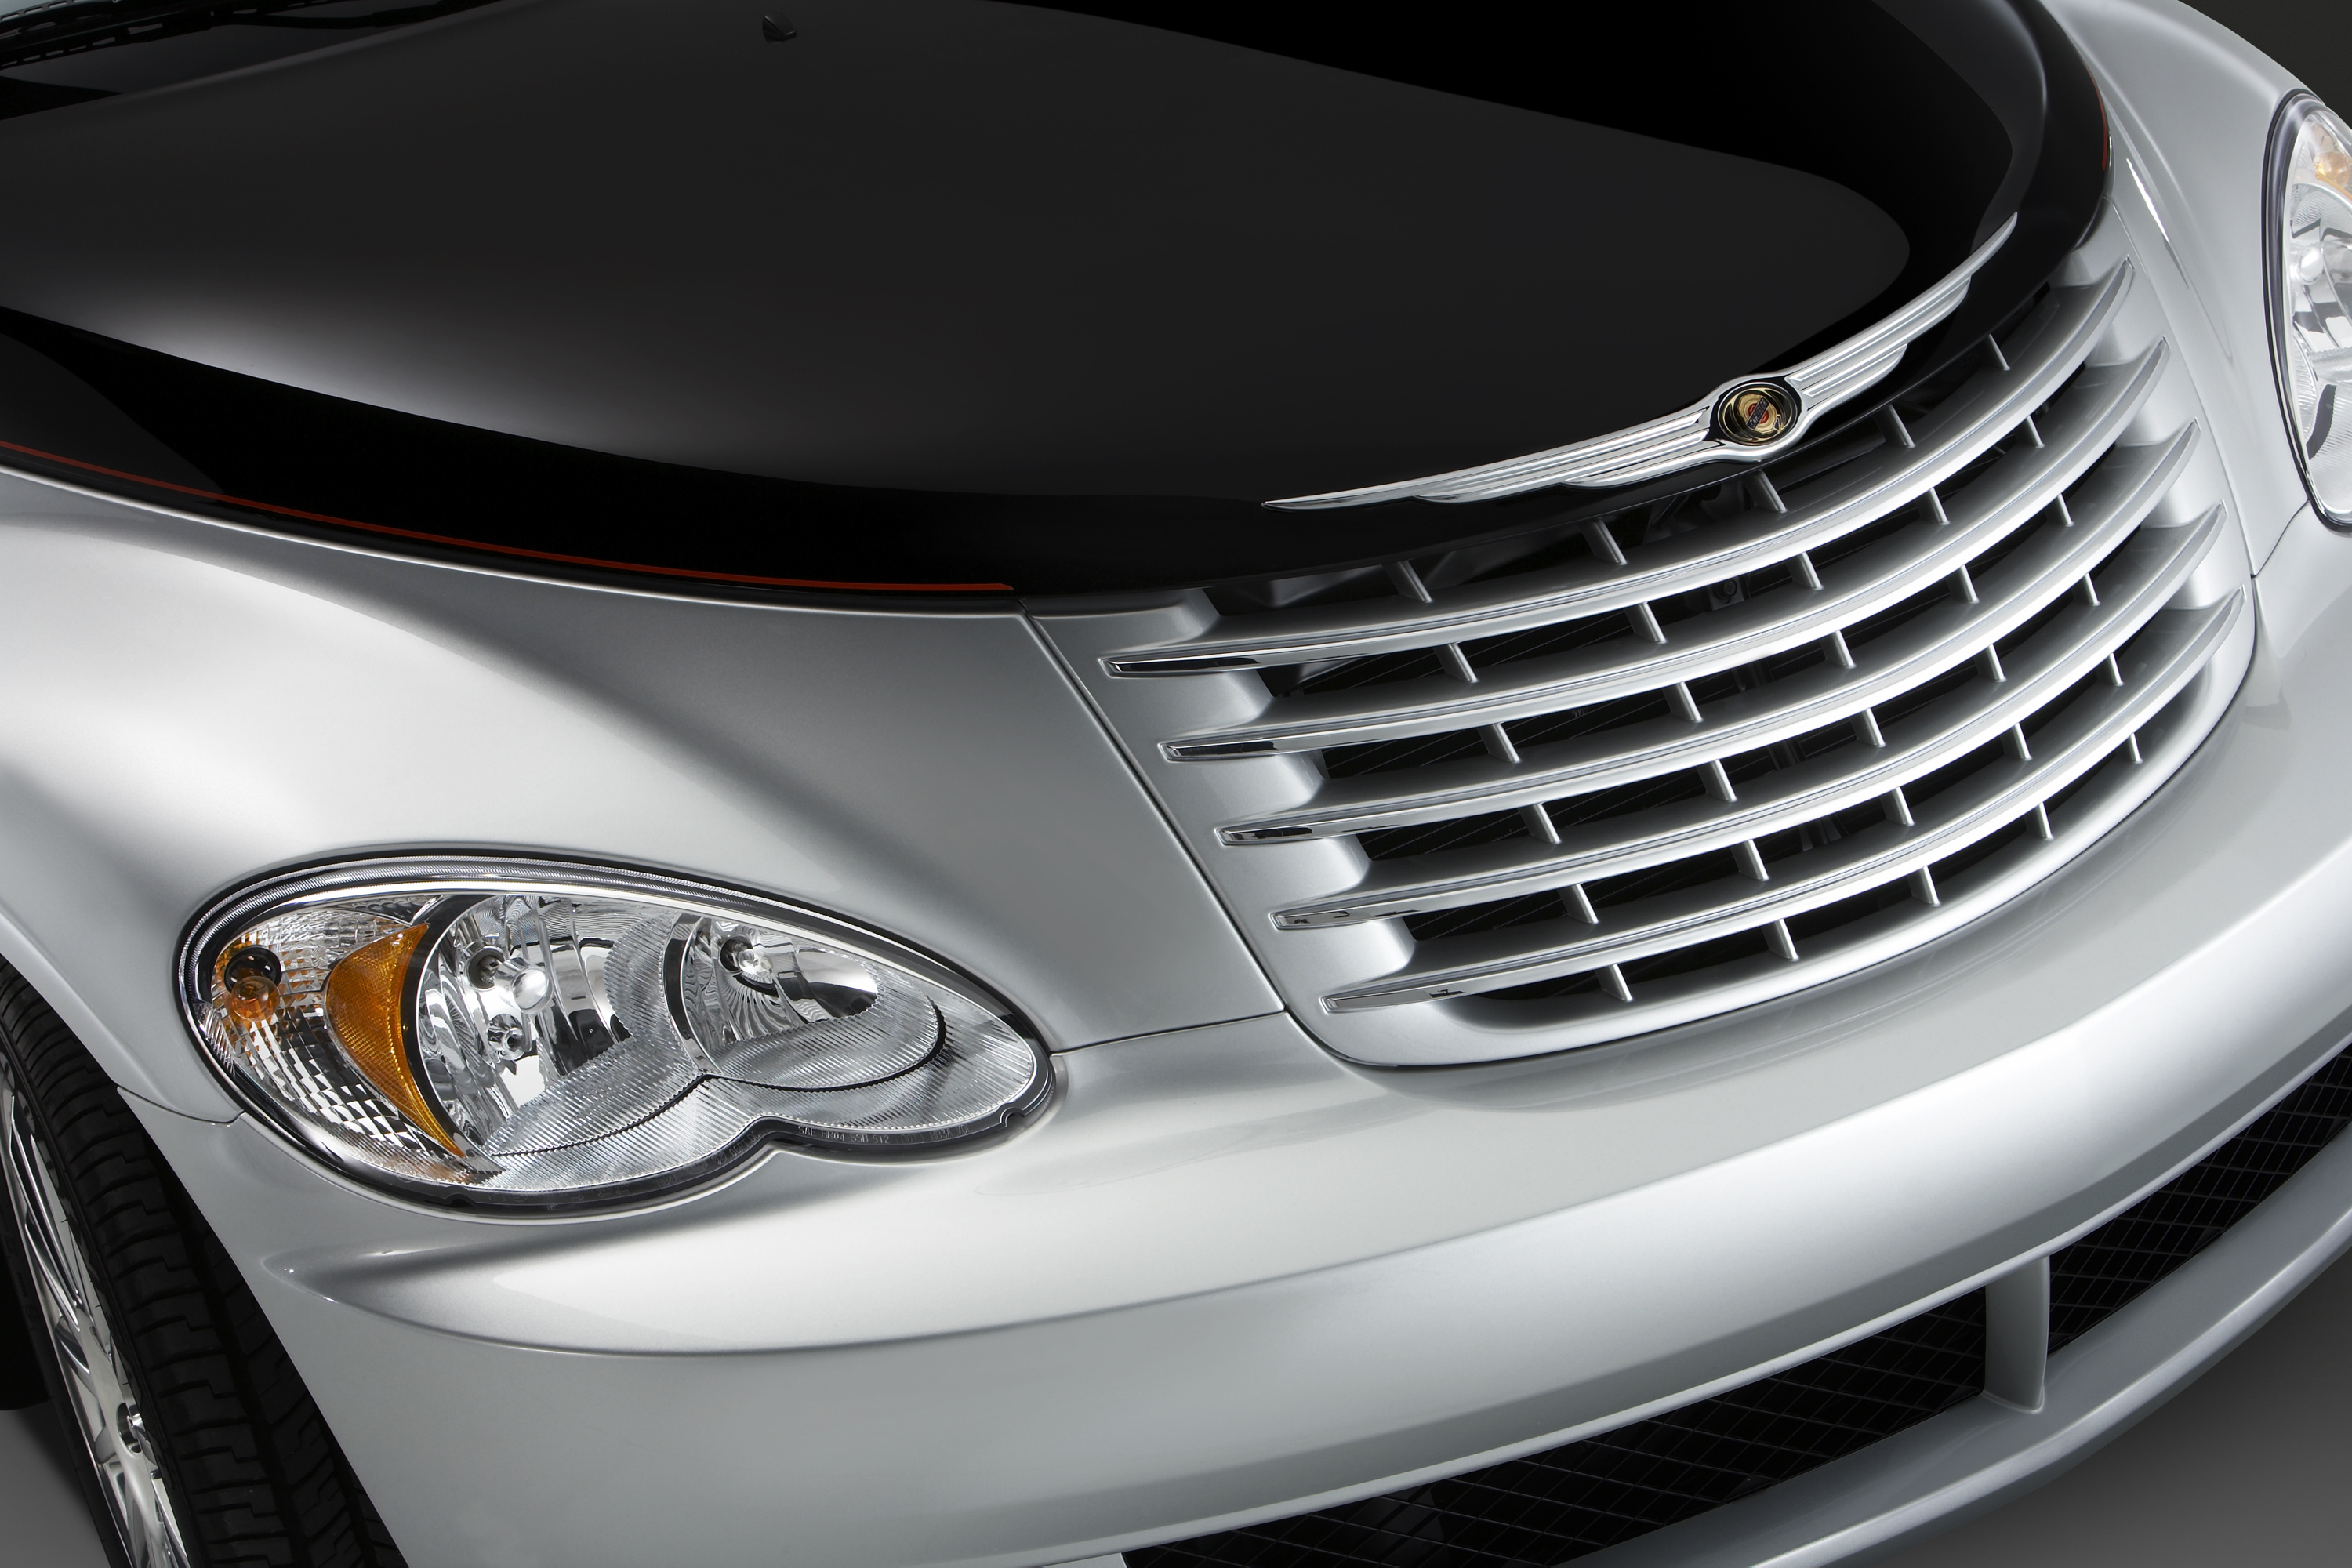 Chrysler PT Cruiser, Luxury crossover SUV, NetCarShow images, PT Cruiser couture edition, 3000x2000 HD Desktop